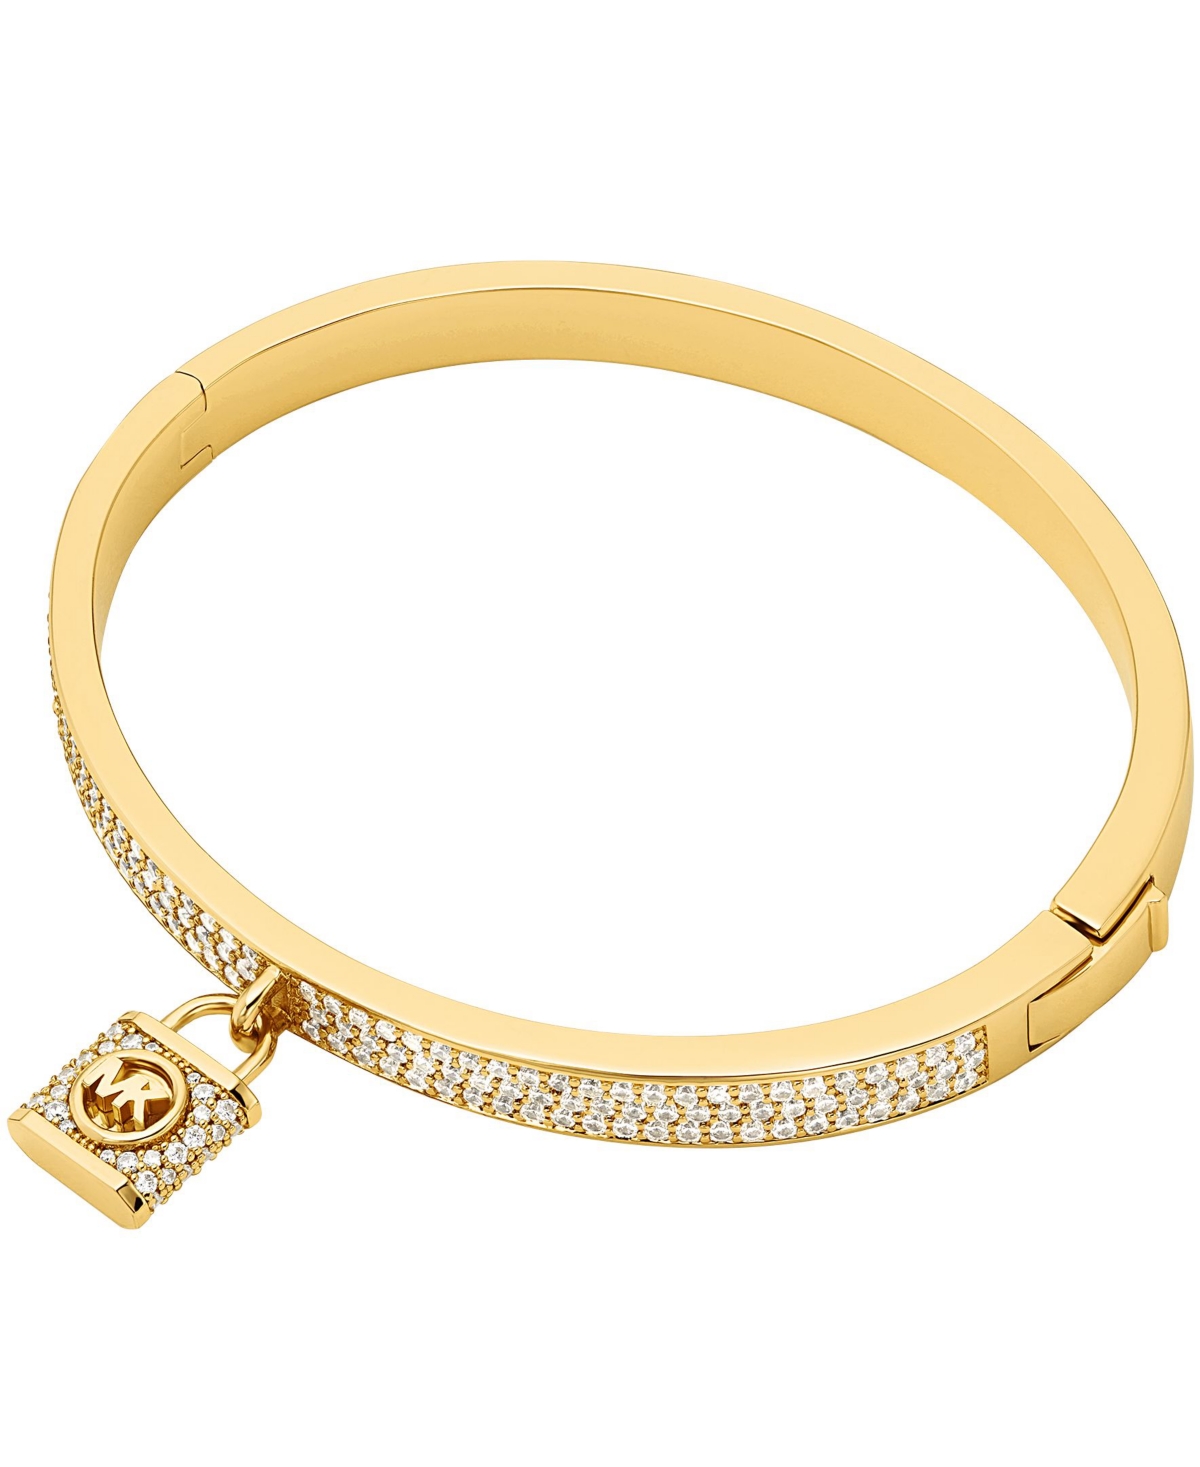 Michael Kors Pave Lock Charm Bangle In Gold